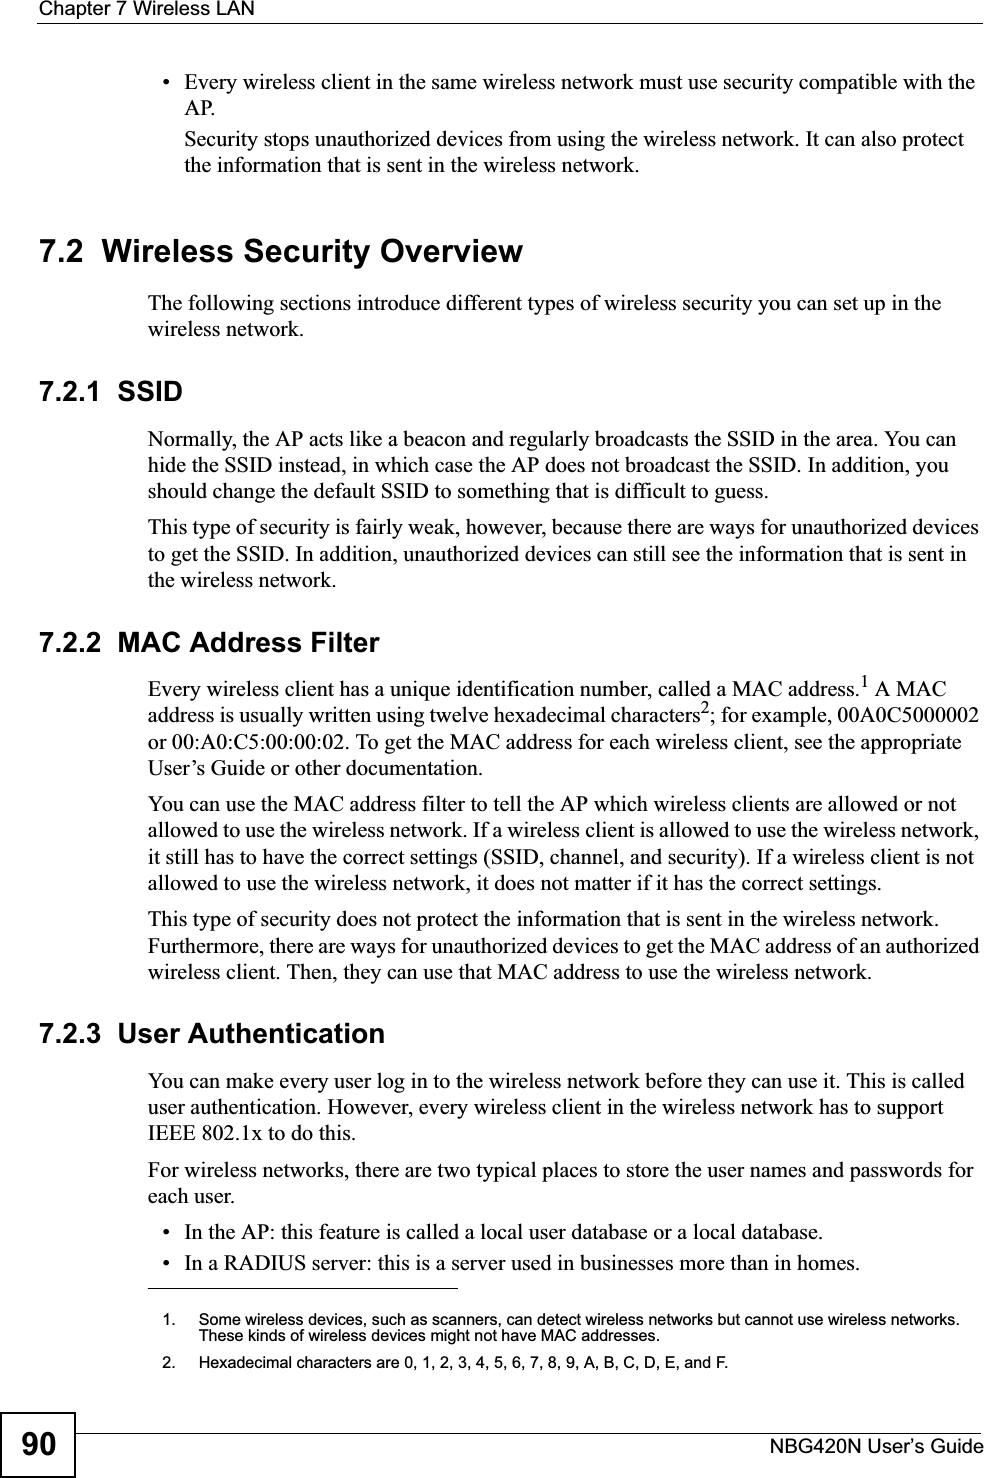 Chapter 7 Wireless LANNBG420N User’s Guide90• Every wireless client in the same wireless network must use security compatible with the AP.Security stops unauthorized devices from using the wireless network. It can also protect the information that is sent in the wireless network.7.2  Wireless Security OverviewThe following sections introduce different types of wireless security you can set up in the wireless network.7.2.1  SSIDNormally, the AP acts like a beacon and regularly broadcasts the SSID in the area. You can hide the SSID instead, in which case the AP does not broadcast the SSID. In addition, you should change the default SSID to something that is difficult to guess.This type of security is fairly weak, however, because there are ways for unauthorized devices to get the SSID. In addition, unauthorized devices can still see the information that is sent in the wireless network.7.2.2  MAC Address FilterEvery wireless client has a unique identification number, called a MAC address.1 A MAC address is usually written using twelve hexadecimal characters2; for example, 00A0C5000002 or 00:A0:C5:00:00:02. To get the MAC address for each wireless client, see the appropriate User’s Guide or other documentation.You can use the MAC address filter to tell the AP which wireless clients are allowed or not allowed to use the wireless network. If a wireless client is allowed to use the wireless network, it still has to have the correct settings (SSID, channel, and security). If a wireless client is not allowed to use the wireless network, it does not matter if it has the correct settings.This type of security does not protect the information that is sent in the wireless network. Furthermore, there are ways for unauthorized devices to get the MAC address of an authorized wireless client. Then, they can use that MAC address to use the wireless network.7.2.3  User AuthenticationYou can make every user log in to the wireless network before they can use it. This is called user authentication. However, every wireless client in the wireless network has to support IEEE 802.1x to do this.For wireless networks, there are two typical places to store the user names and passwords for each user.• In the AP: this feature is called a local user database or a local database.• In a RADIUS server: this is a server used in businesses more than in homes.1. Some wireless devices, such as scanners, can detect wireless networks but cannot use wireless networks. These kinds of wireless devices might not have MAC addresses.2. Hexadecimal characters are 0, 1, 2, 3, 4, 5, 6, 7, 8, 9, A, B, C, D, E, and F.